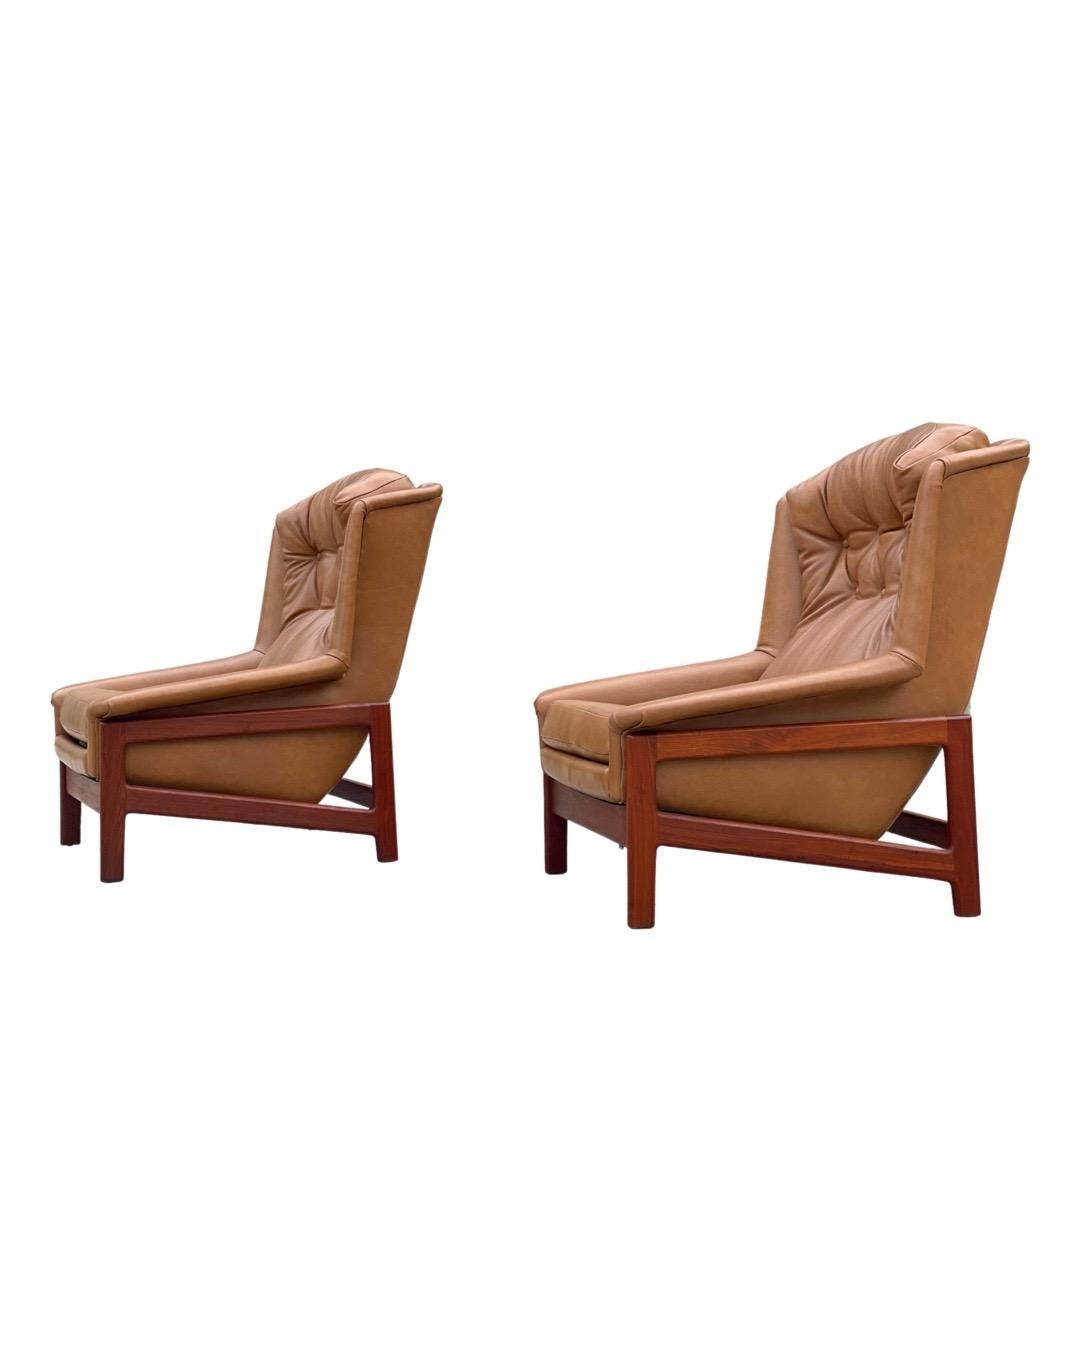 Midcentury Reclining Lounge Chairs in Leather + Walnut by Folke Ohlsson for DUX For Sale 5